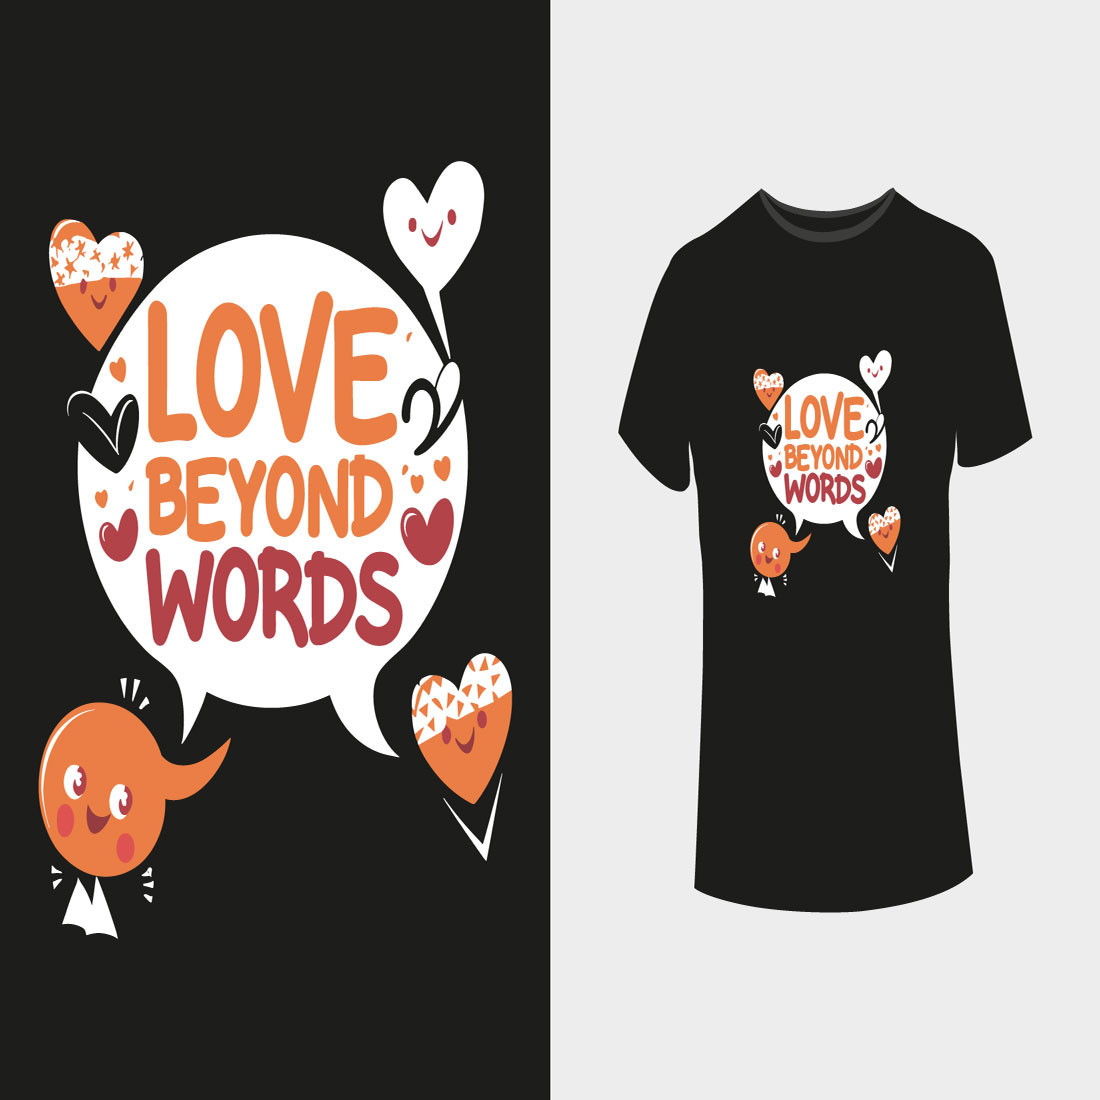 Love beyond words-4 design preview image.